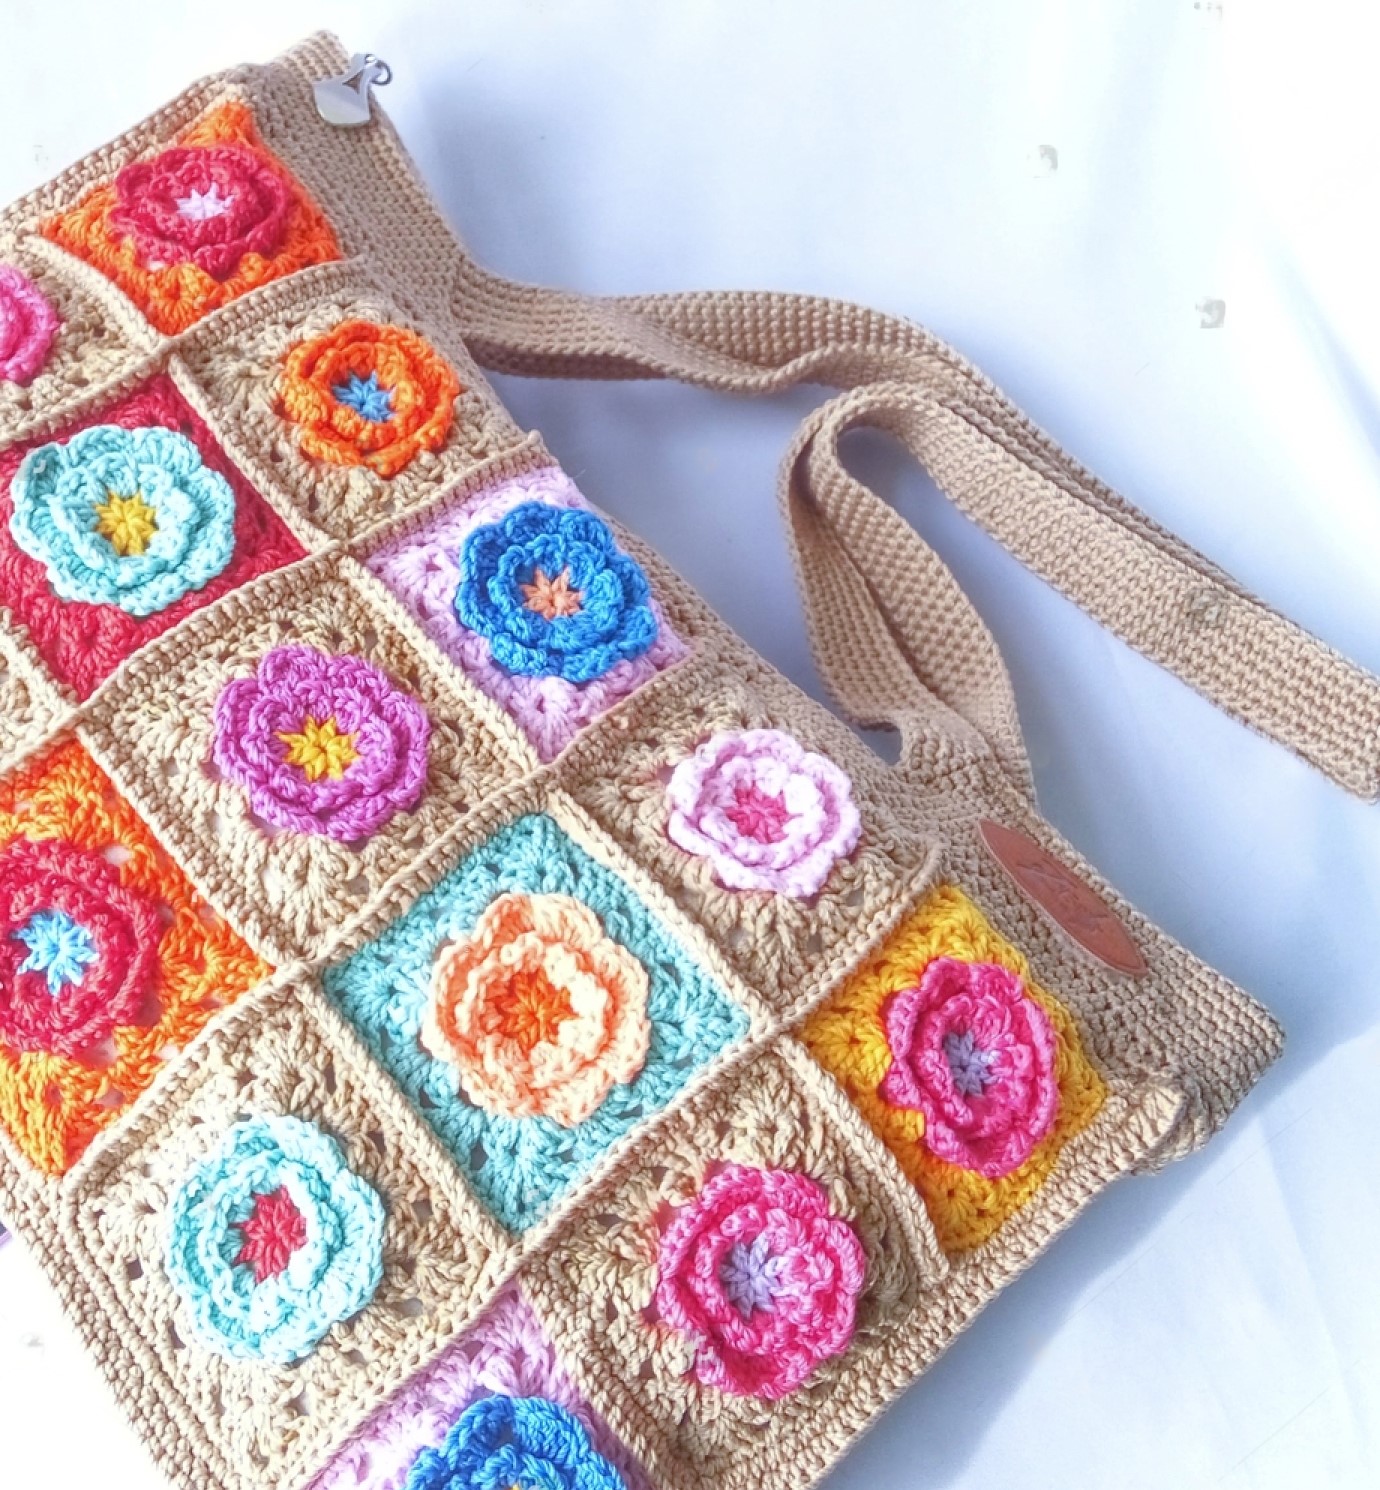 How to Crochet a Granny Square Bag? | TheAmberPost